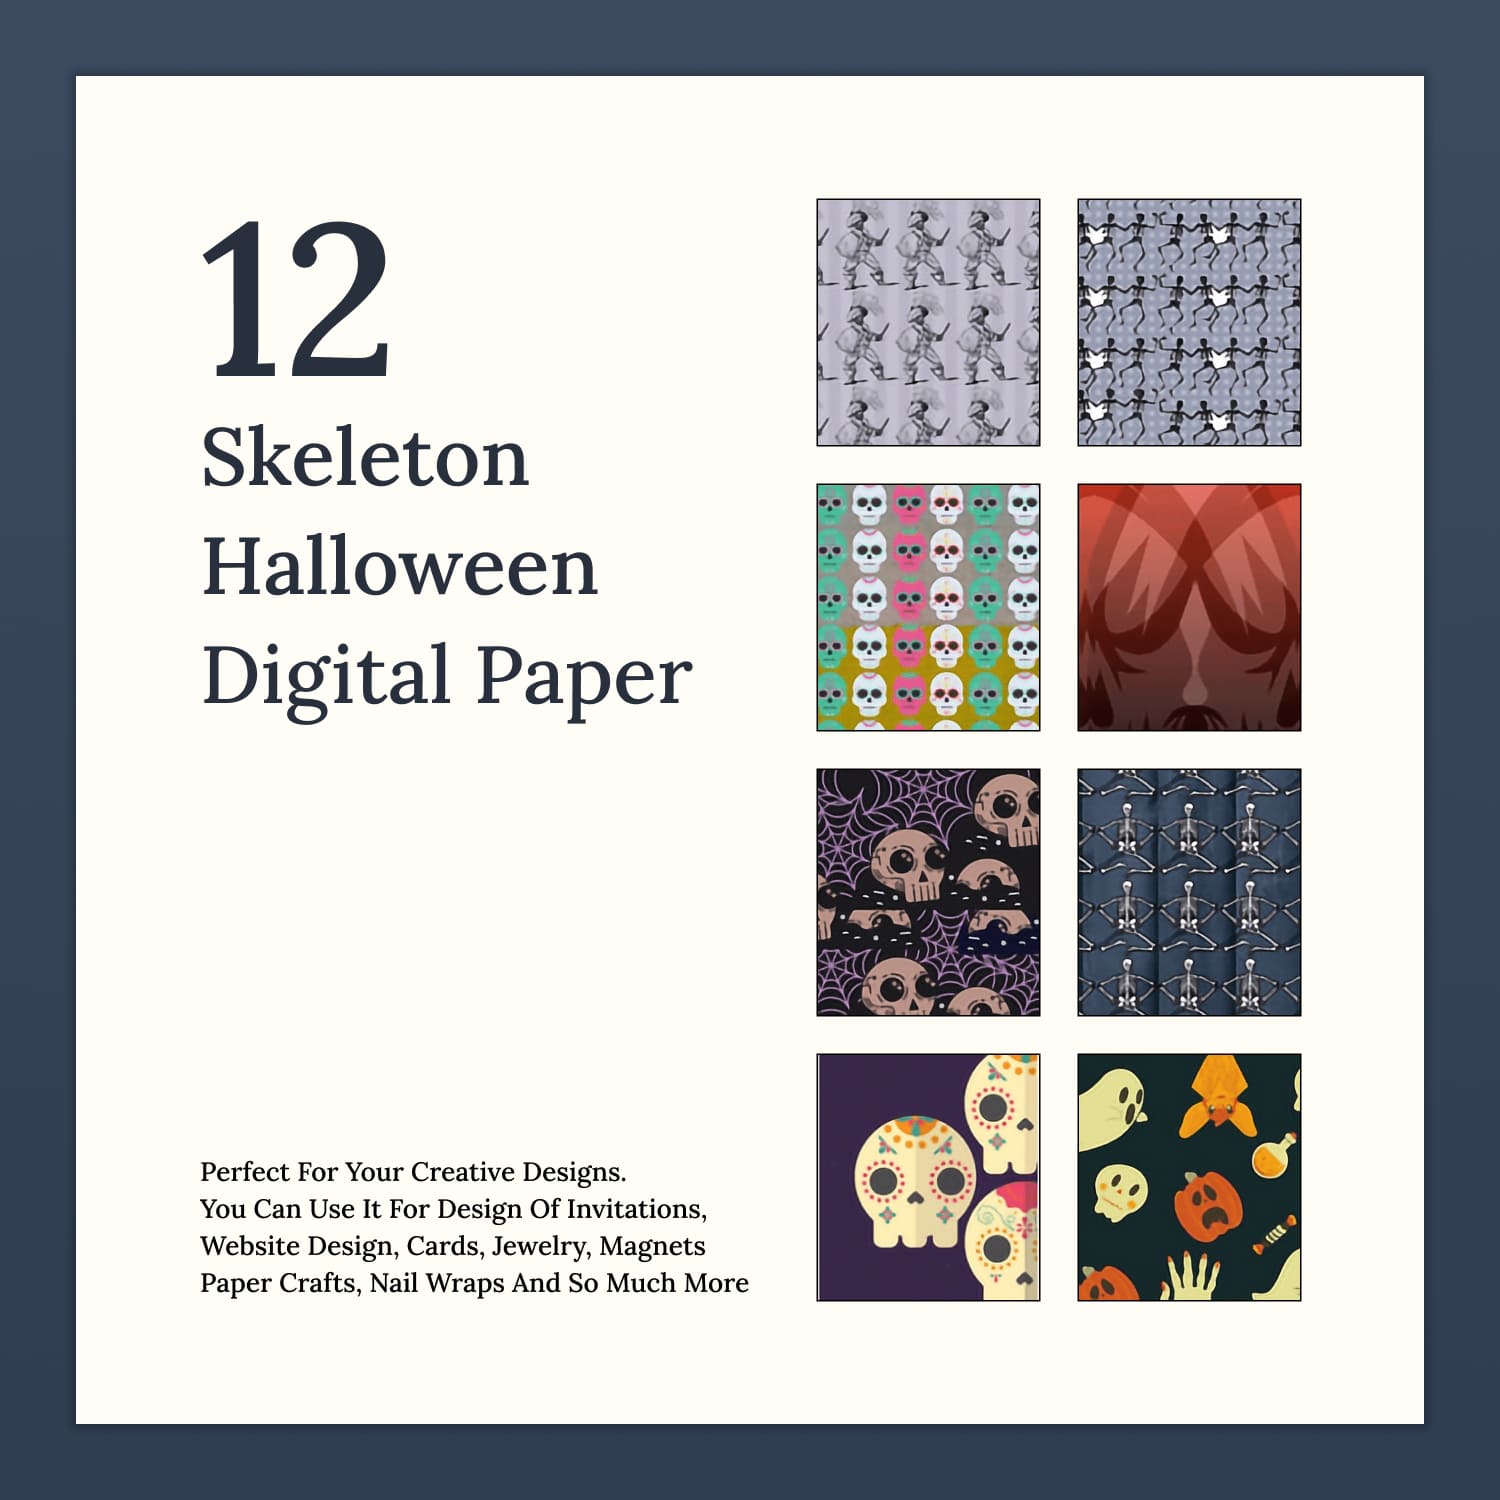 Set of colorful paper retro patterns with skeletons.